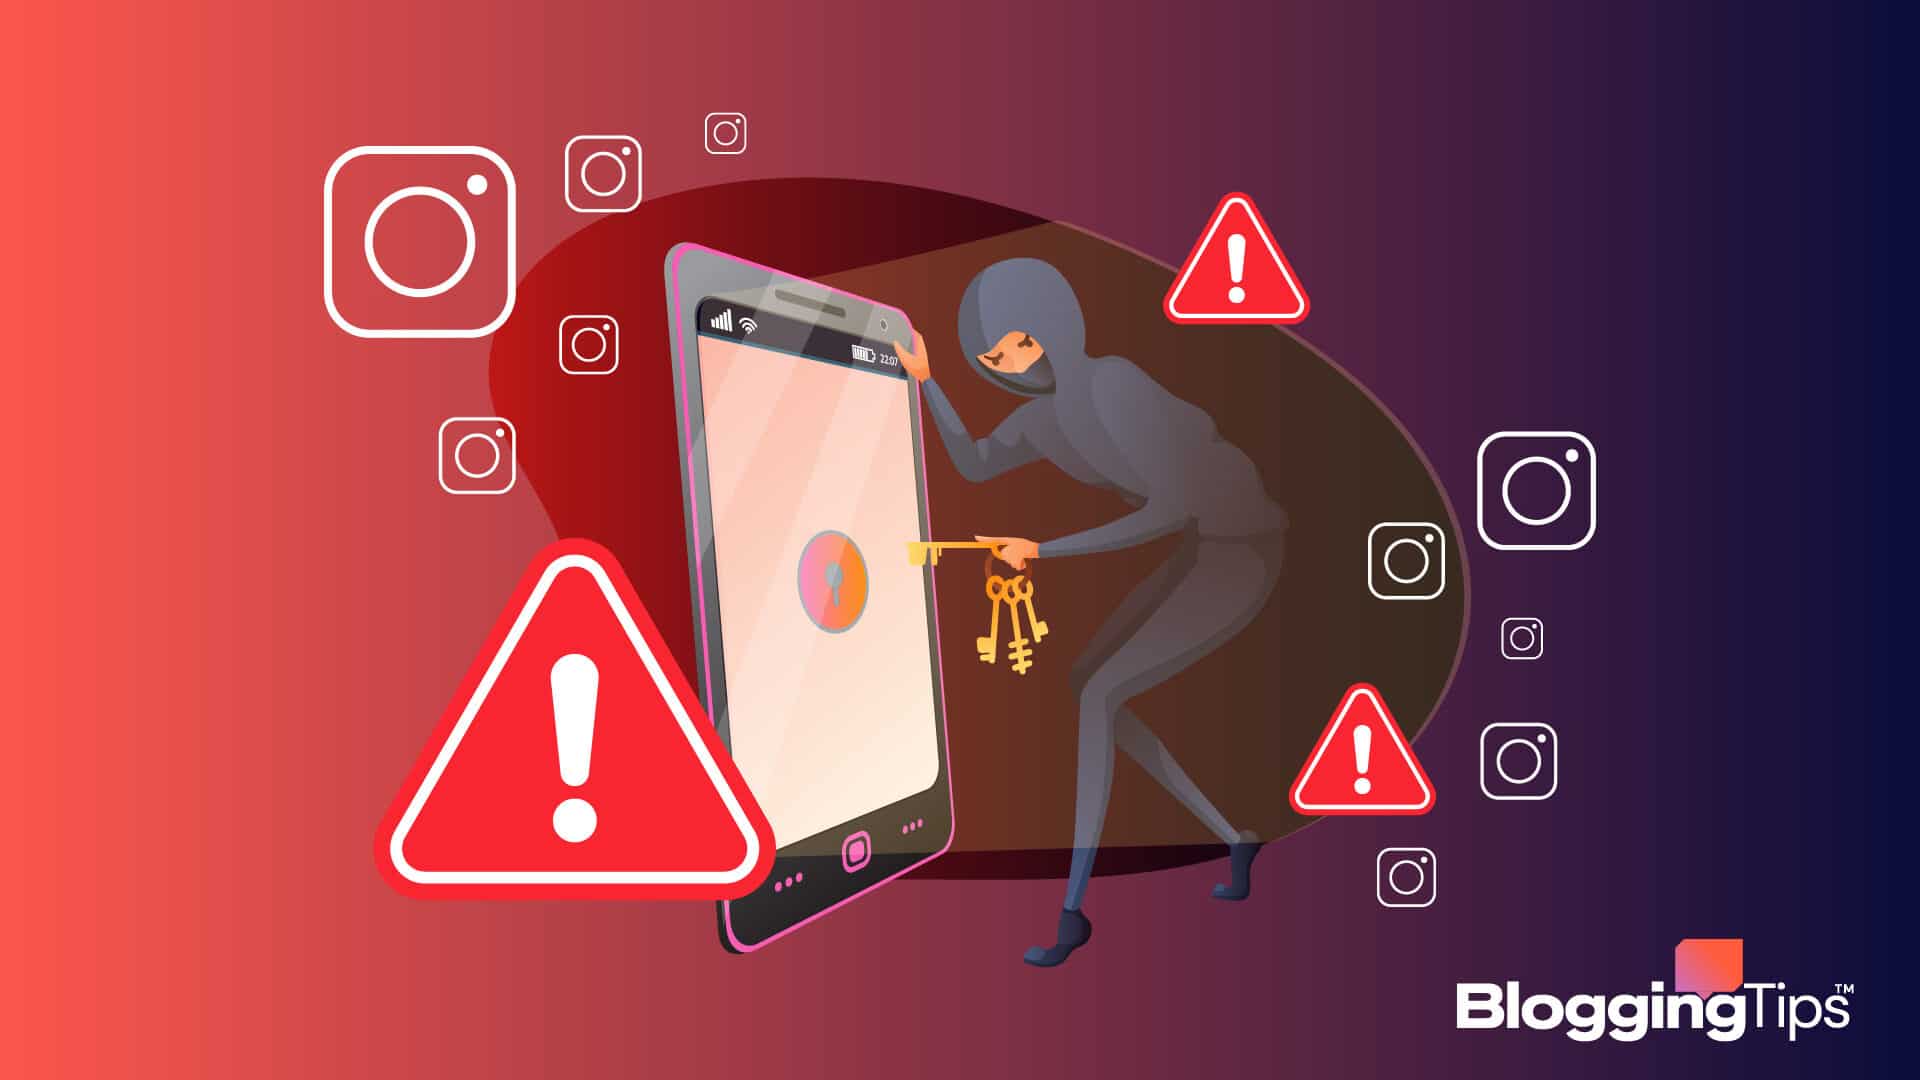 vector graphic showing an illustration of how Instagram accounts get hacked